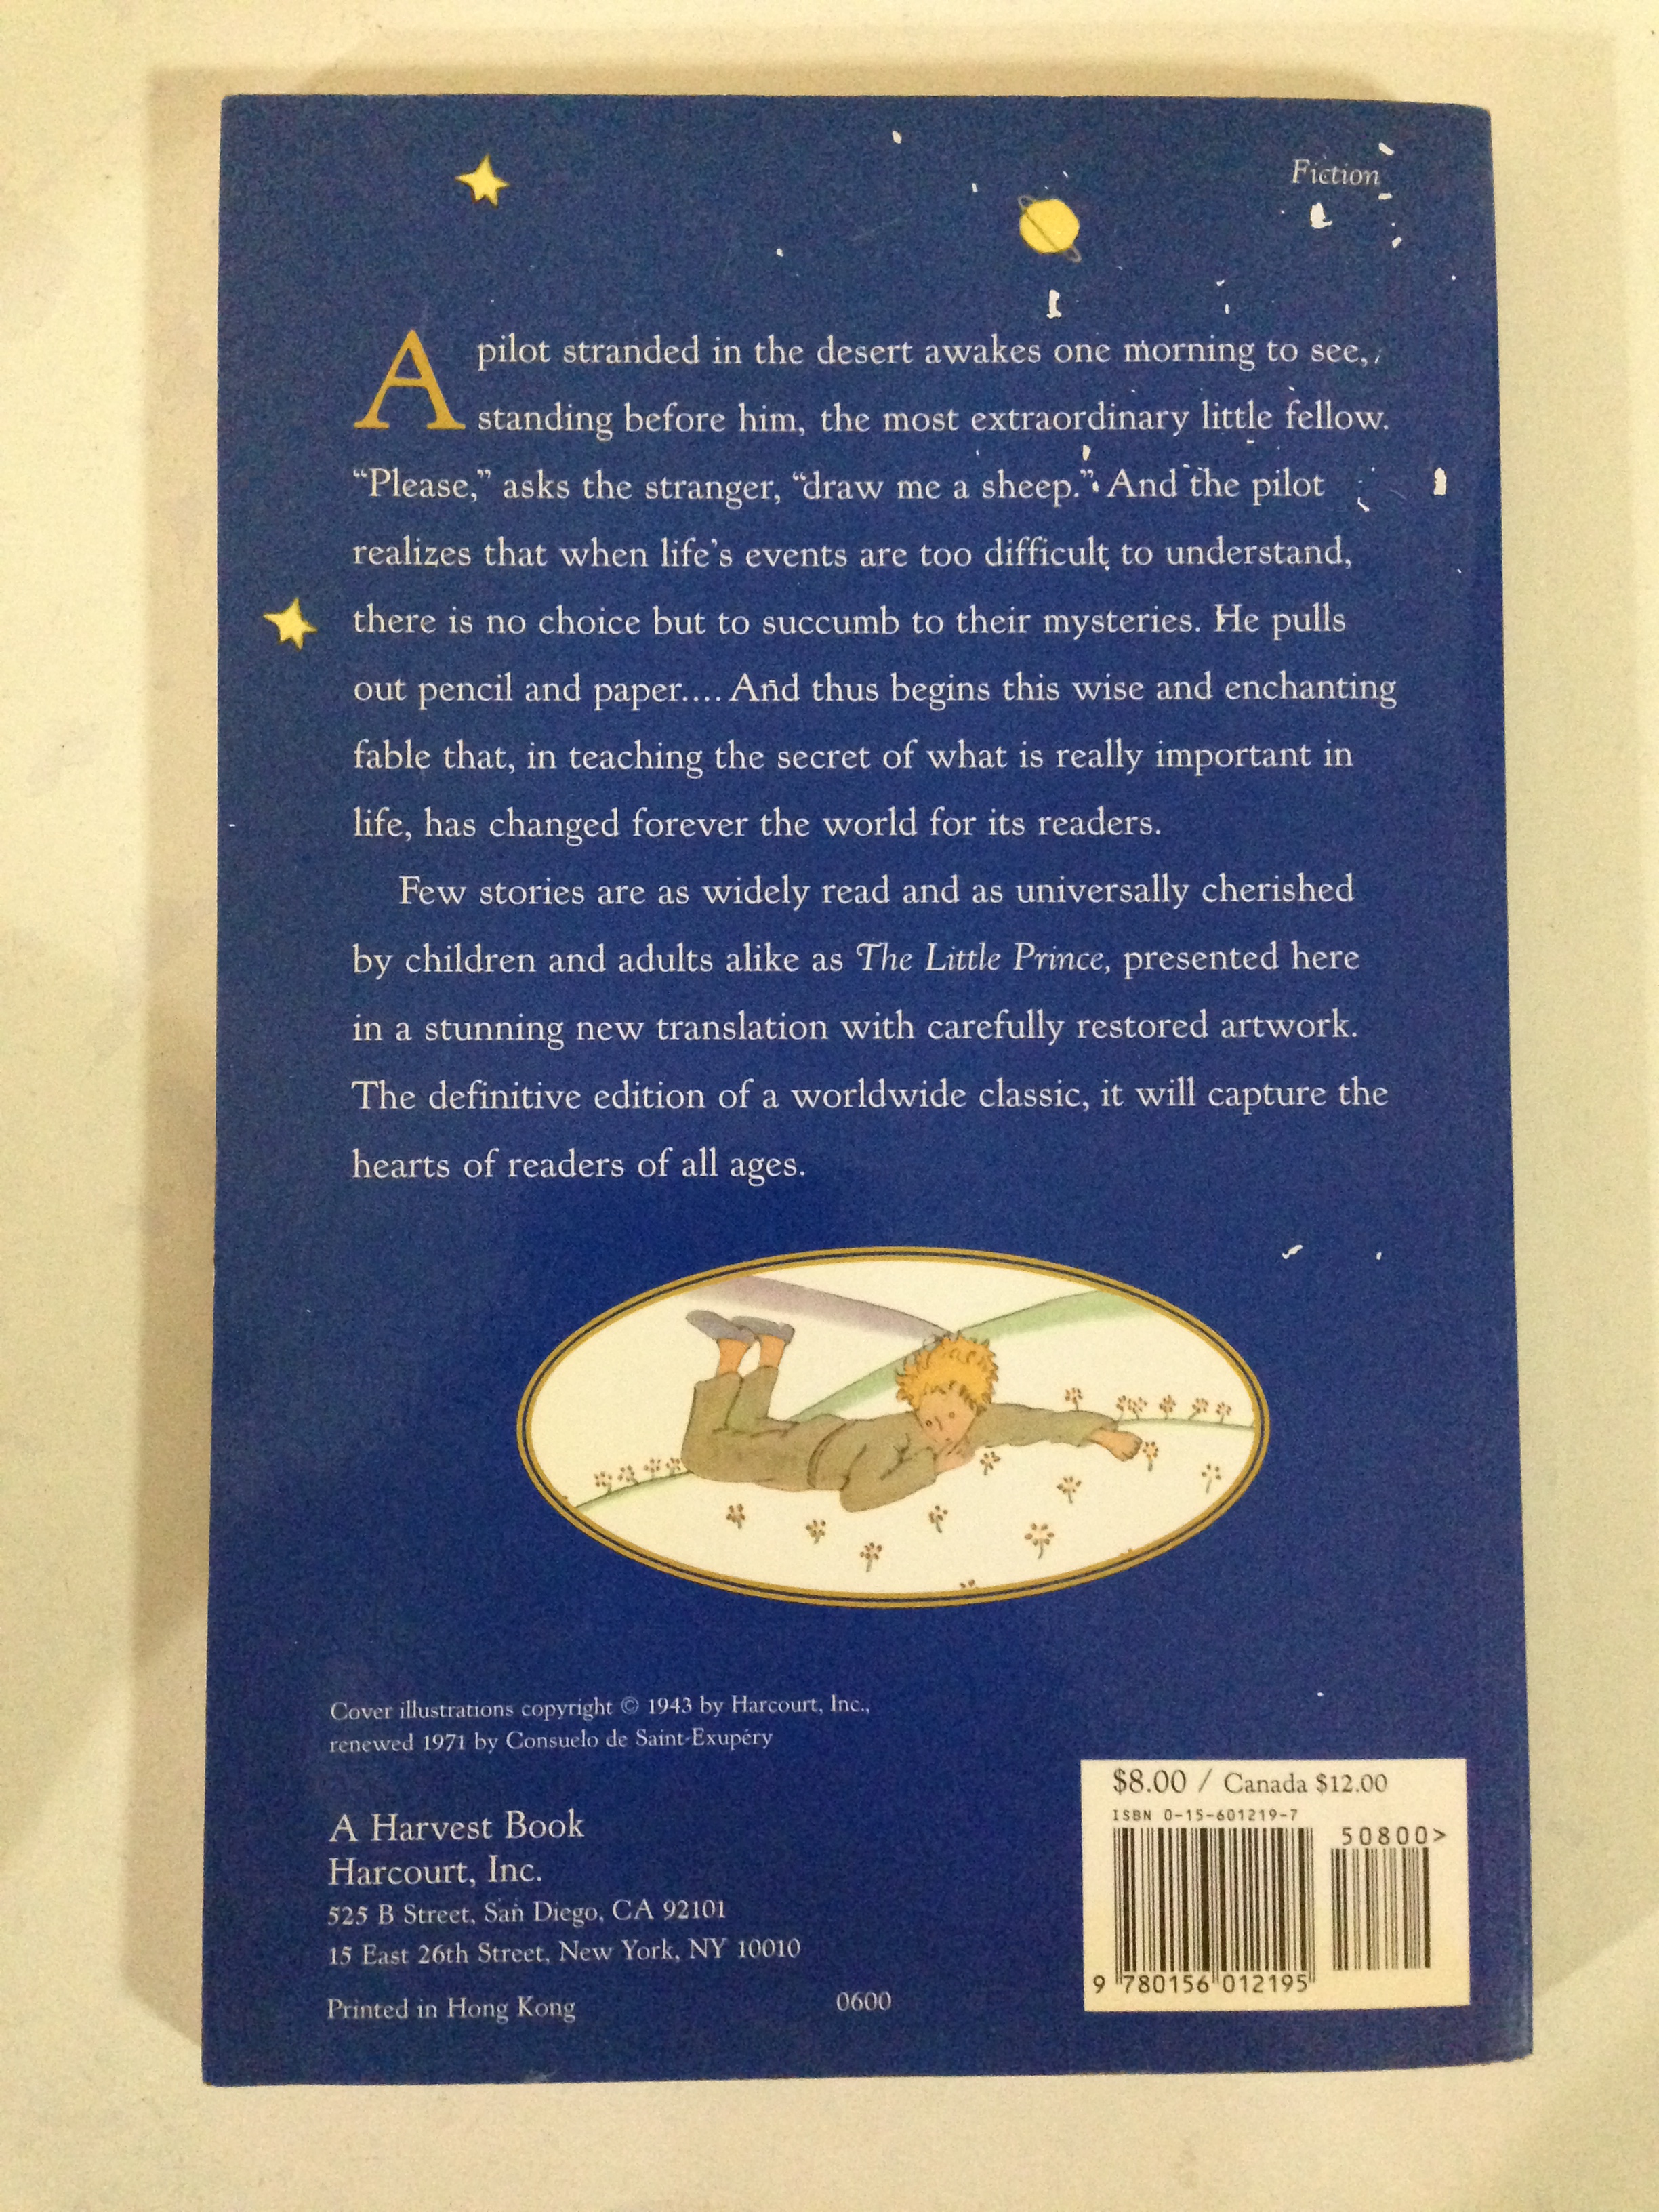 "The Little Prince" back cover and blurb.